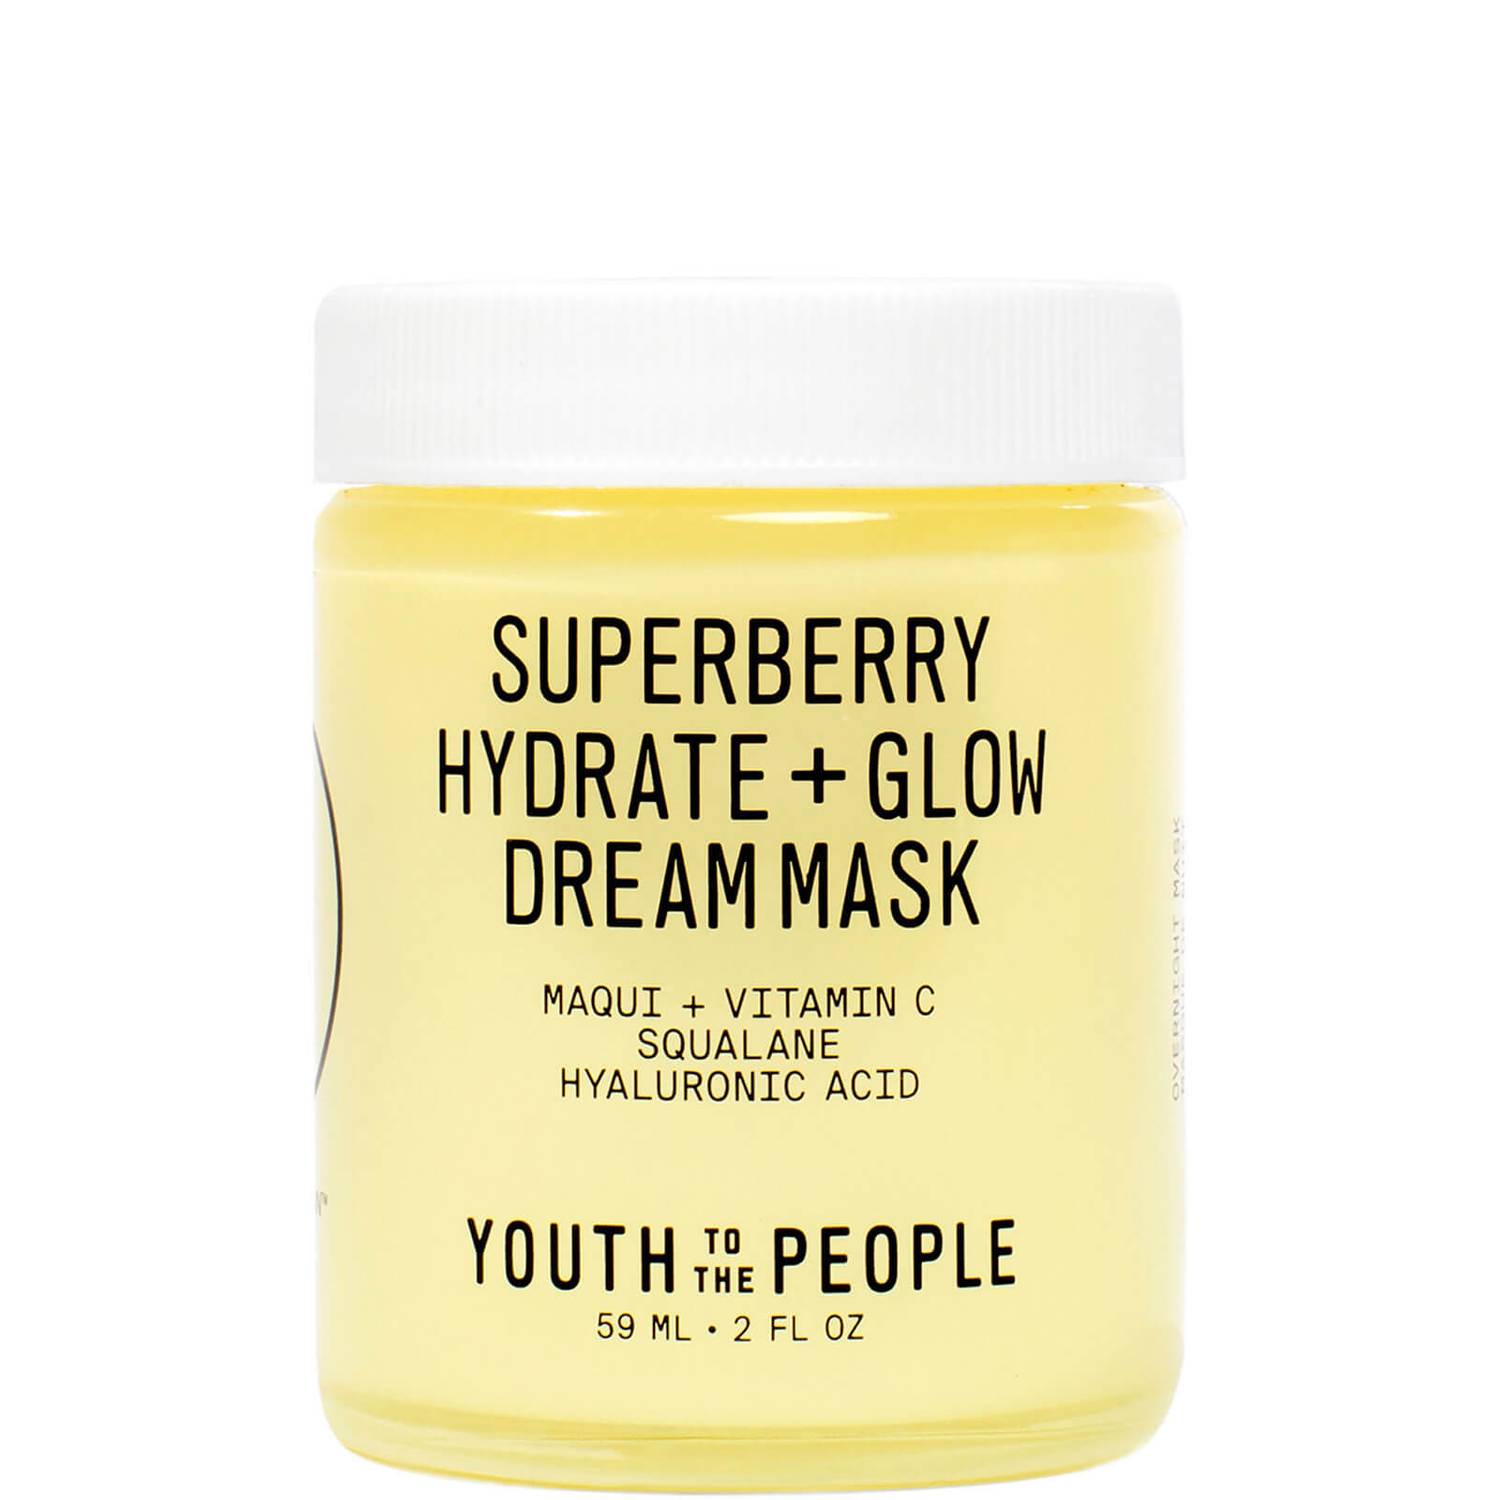 Youth To The People Superberry Hydrate + Glow Dream Mask (Source: www.cultbeauty.co.uk)